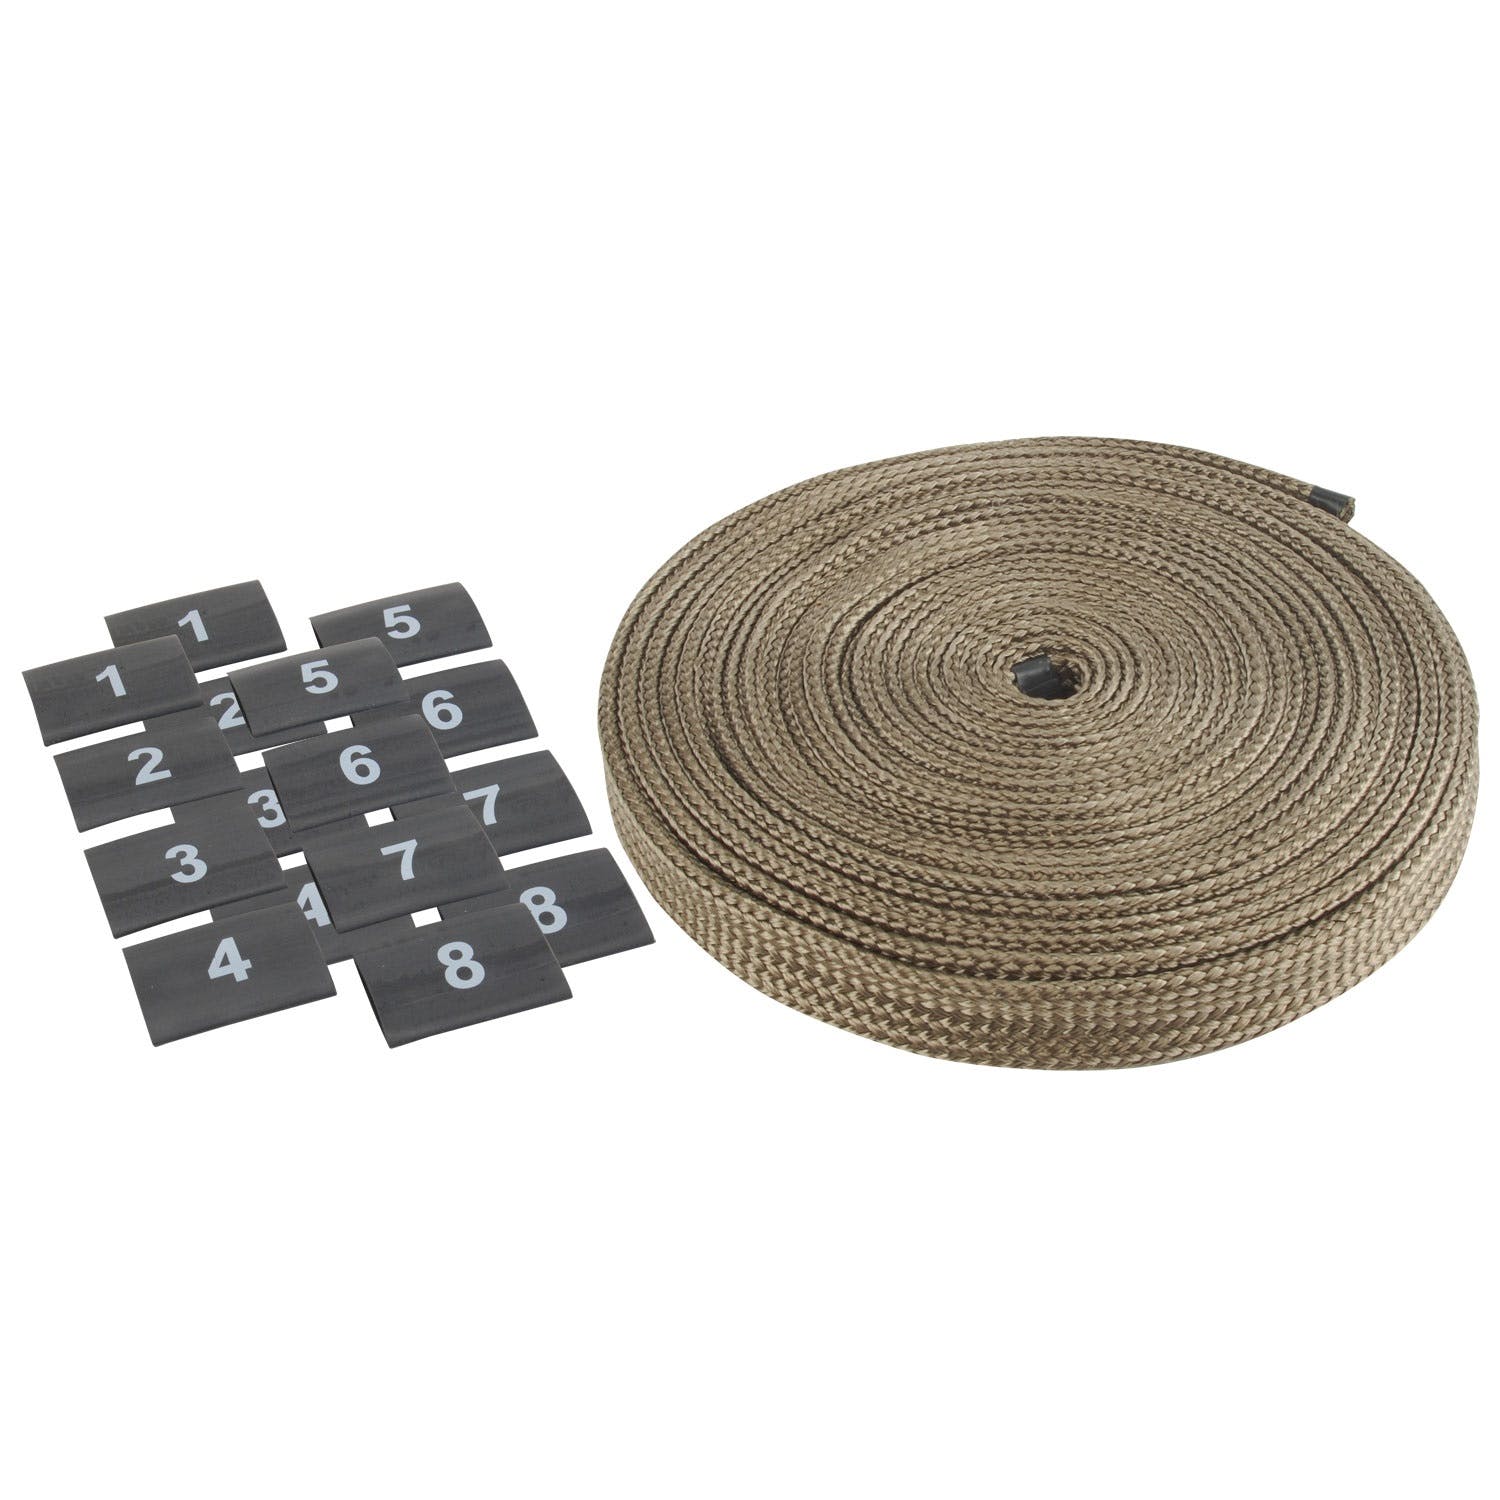 Design Engineering, Inc. 10603 Protect-A-Wire - 8 Cylinder - 25ft - Titanium Sleeving w/Wire Markers